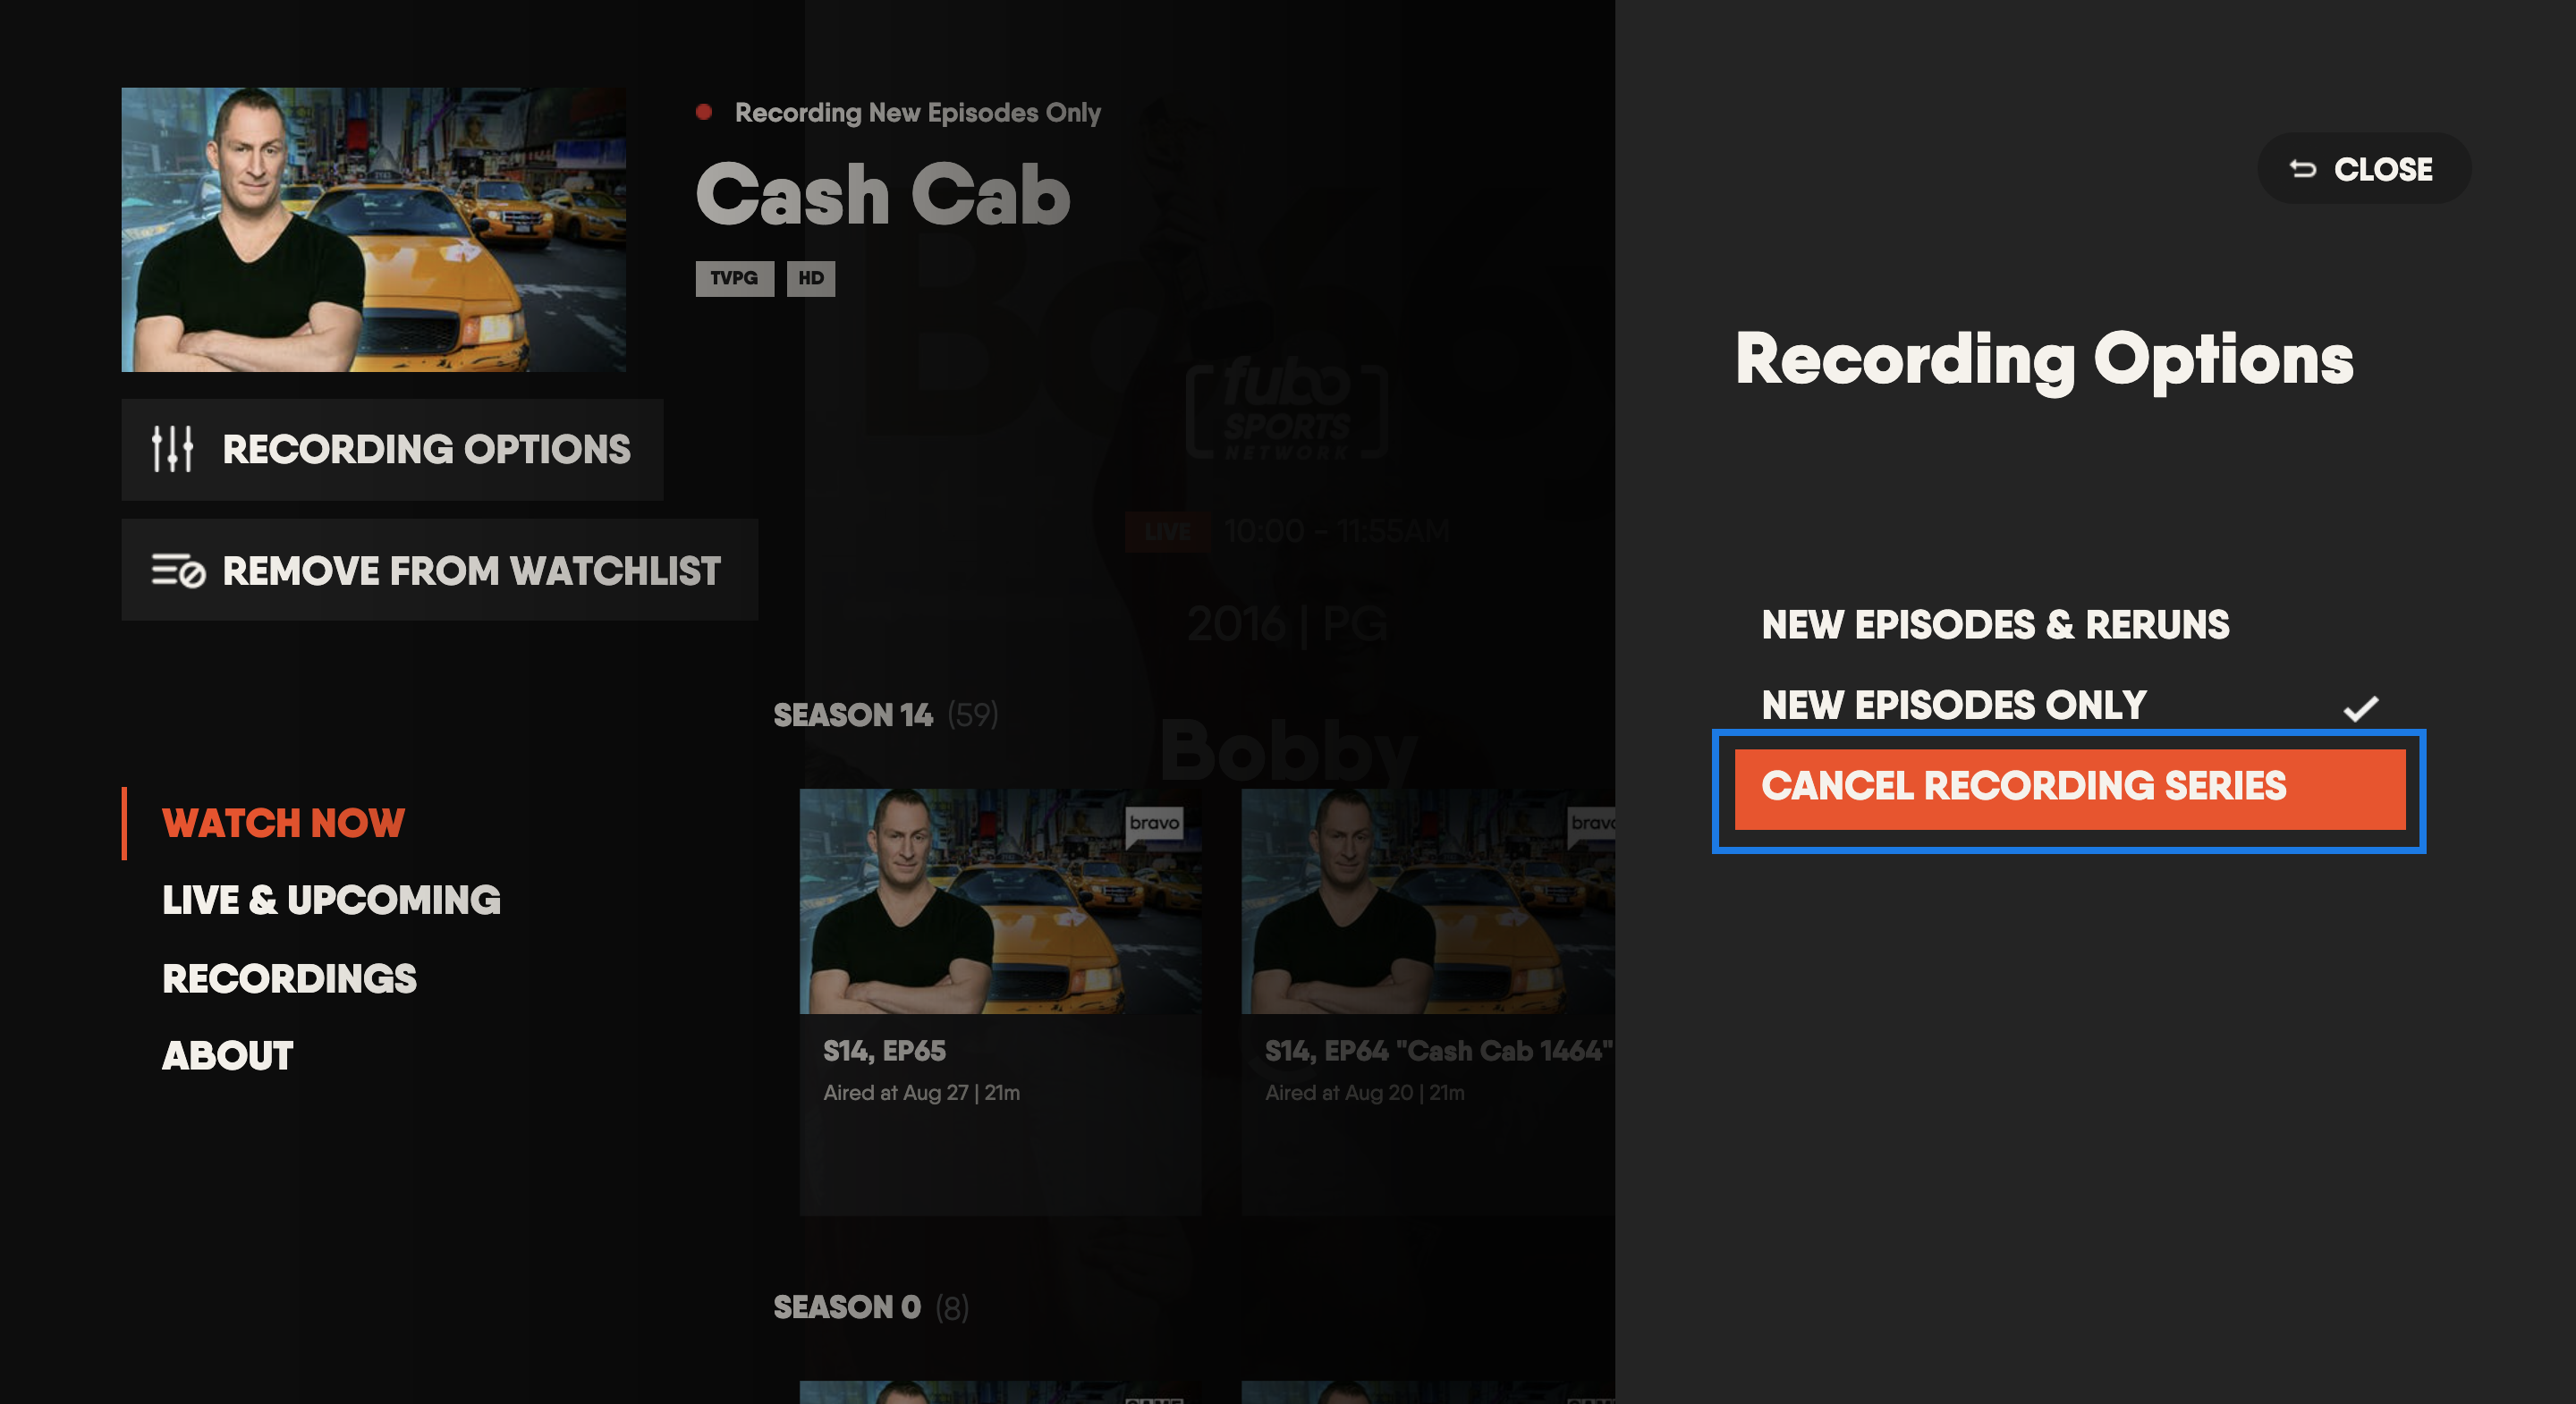 Series details page of the FuboTV app on Samsung Smart TV with recording options shown and CANCEL RECORDING SERIES highlighted